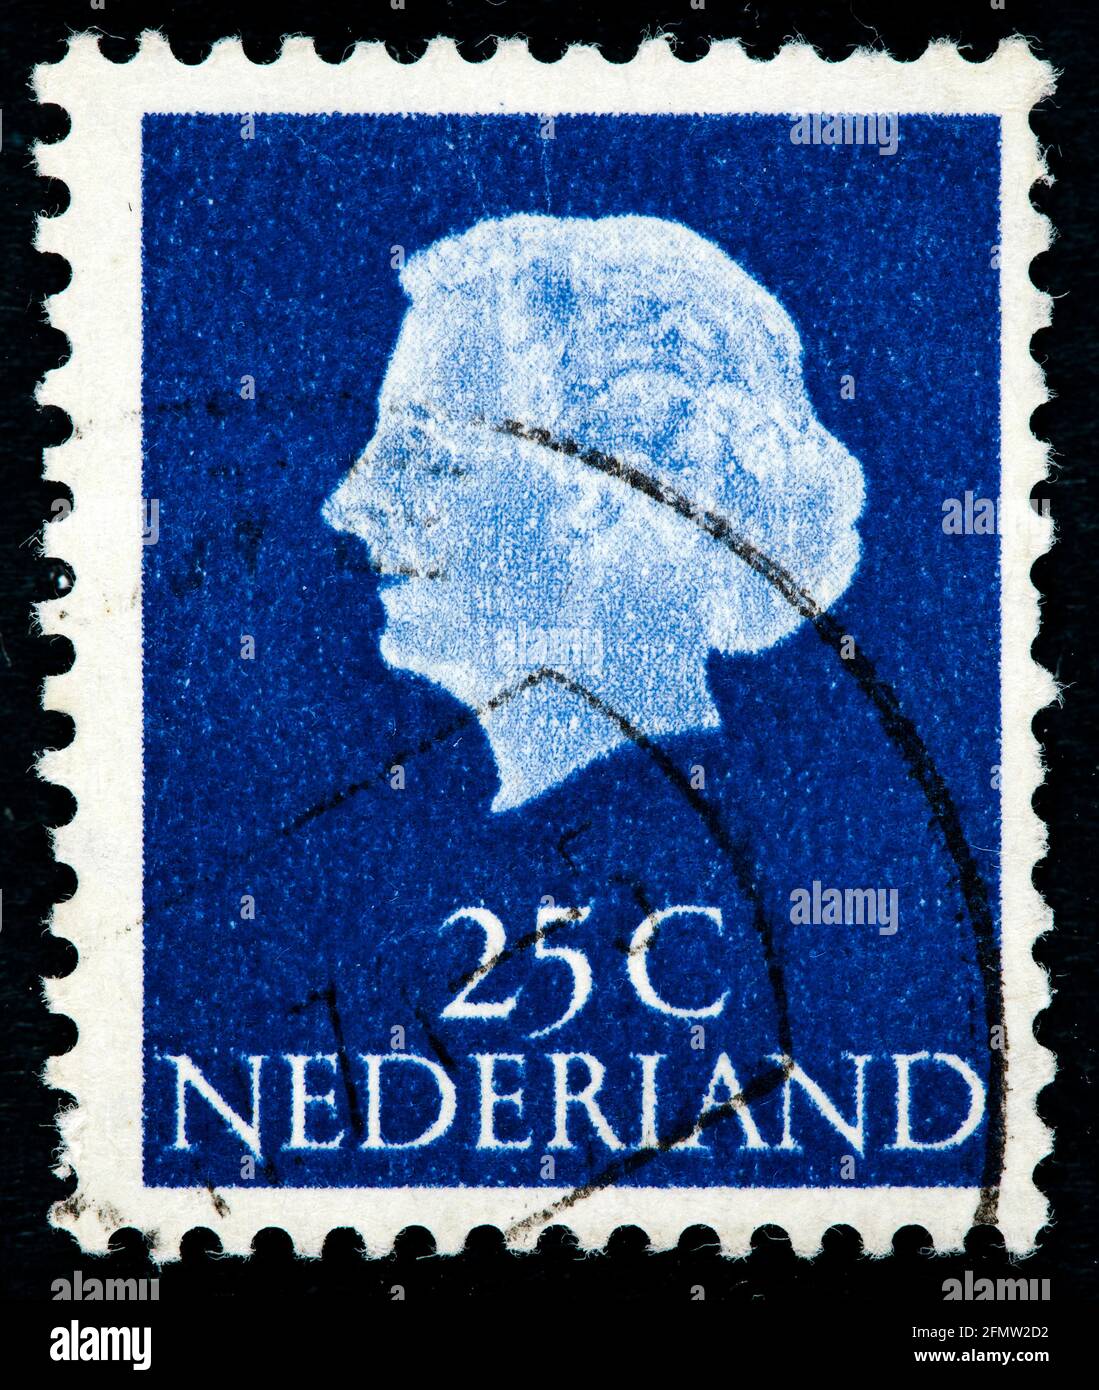 NETHERLANDS - CIRCA 1953: A stamp printed in the Netherlands shows Queen Juliana, circa 1953. Stock Photo